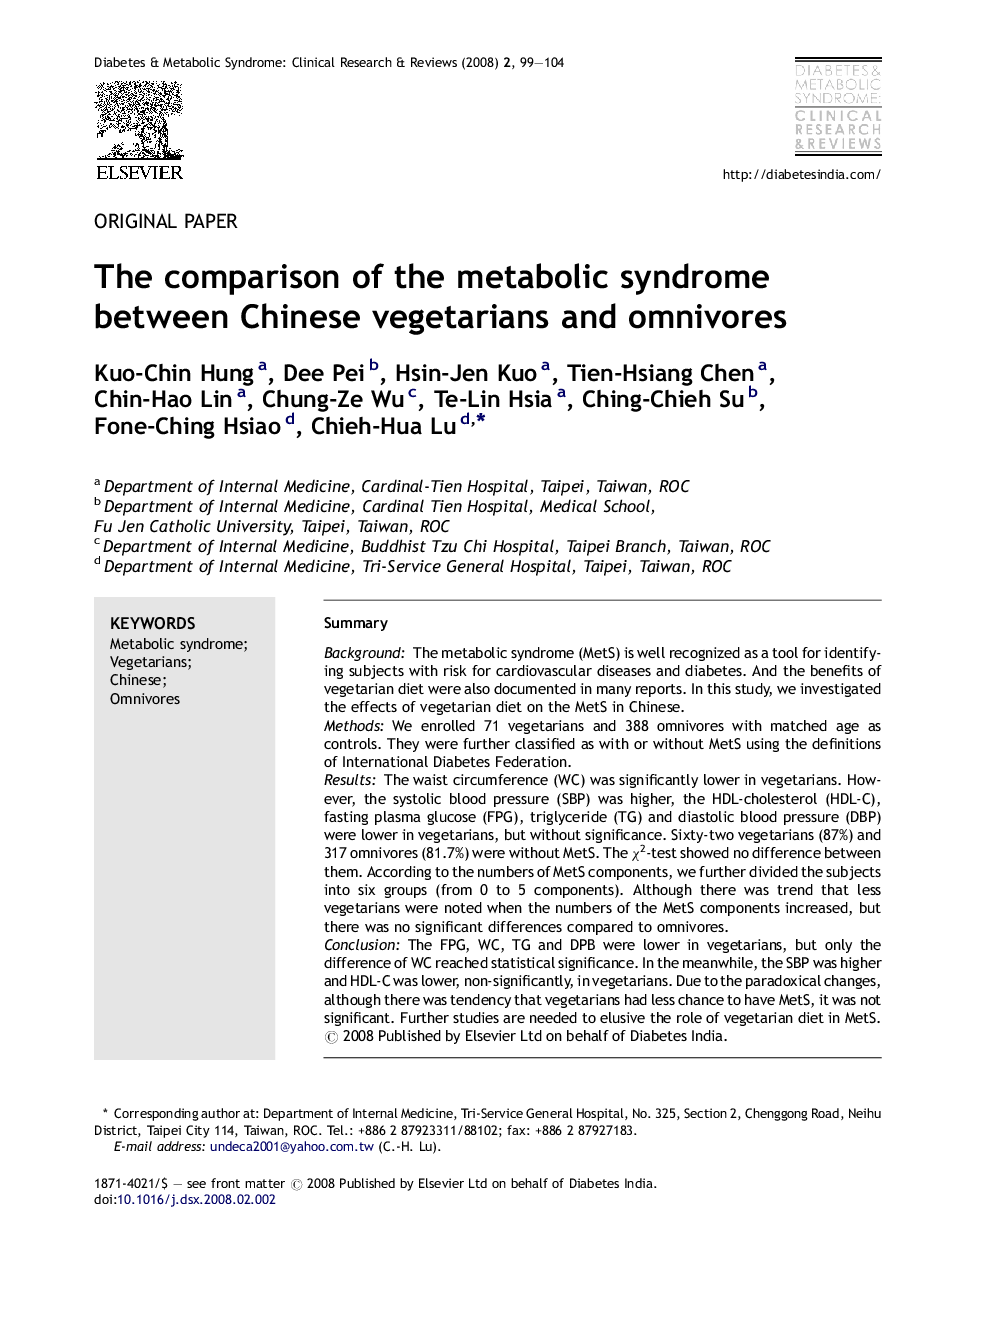 The comparison of the metabolic syndrome between Chinese vegetarians and omnivores